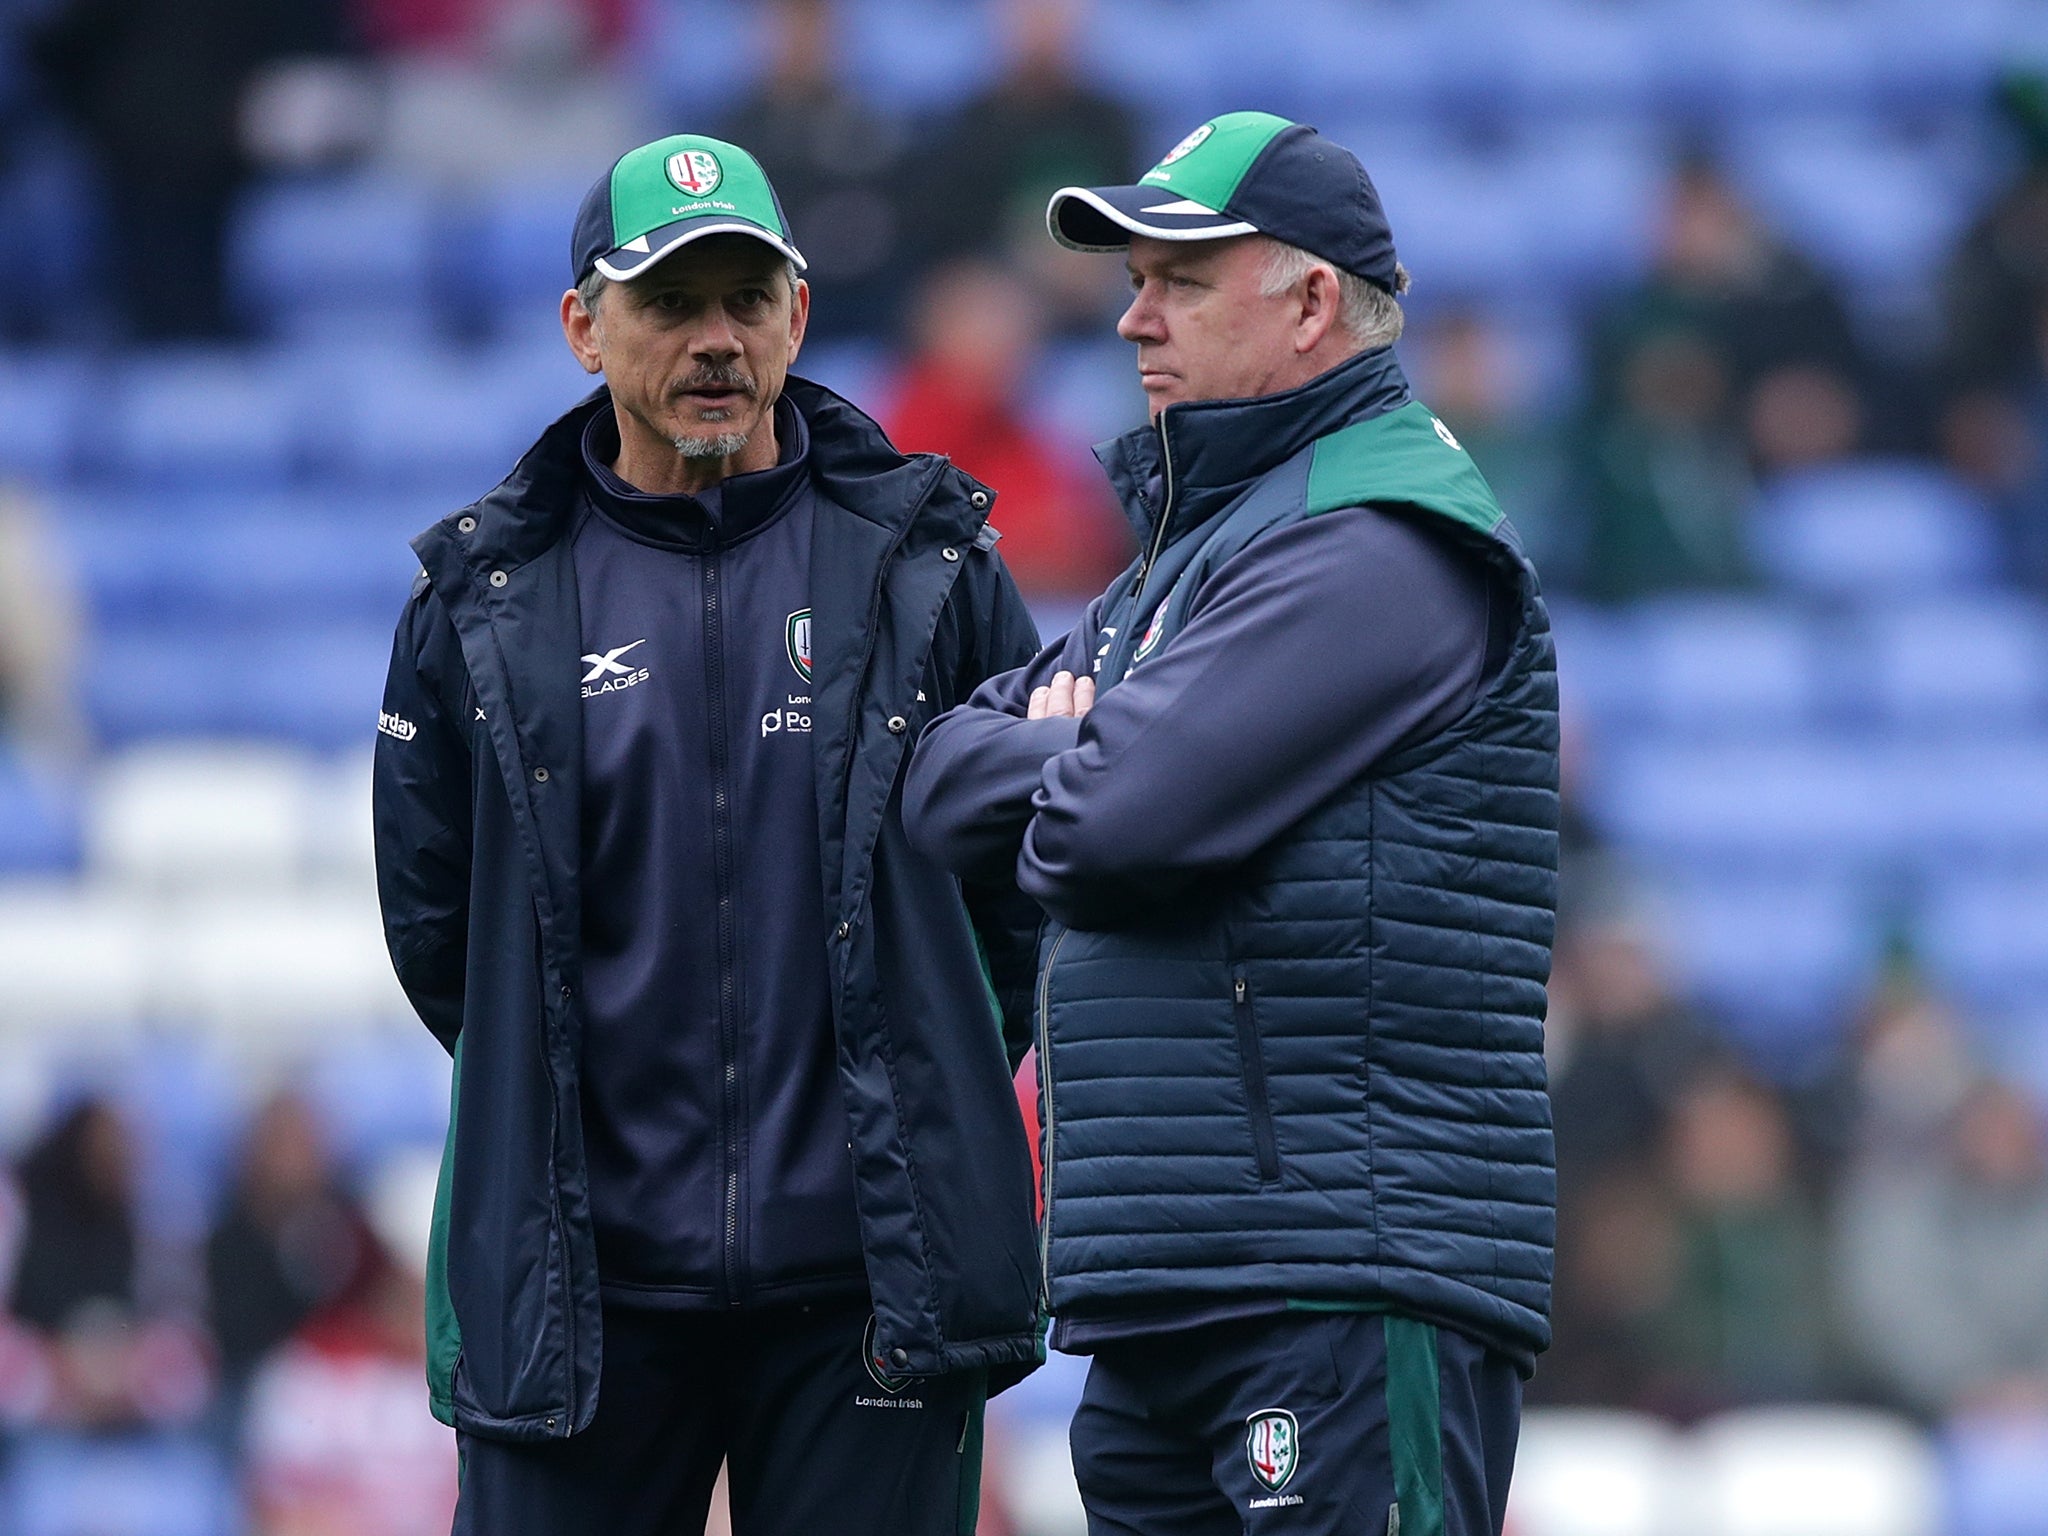 Les Kiss and Declan Kidney have said they are committed to London Irish even in relegation